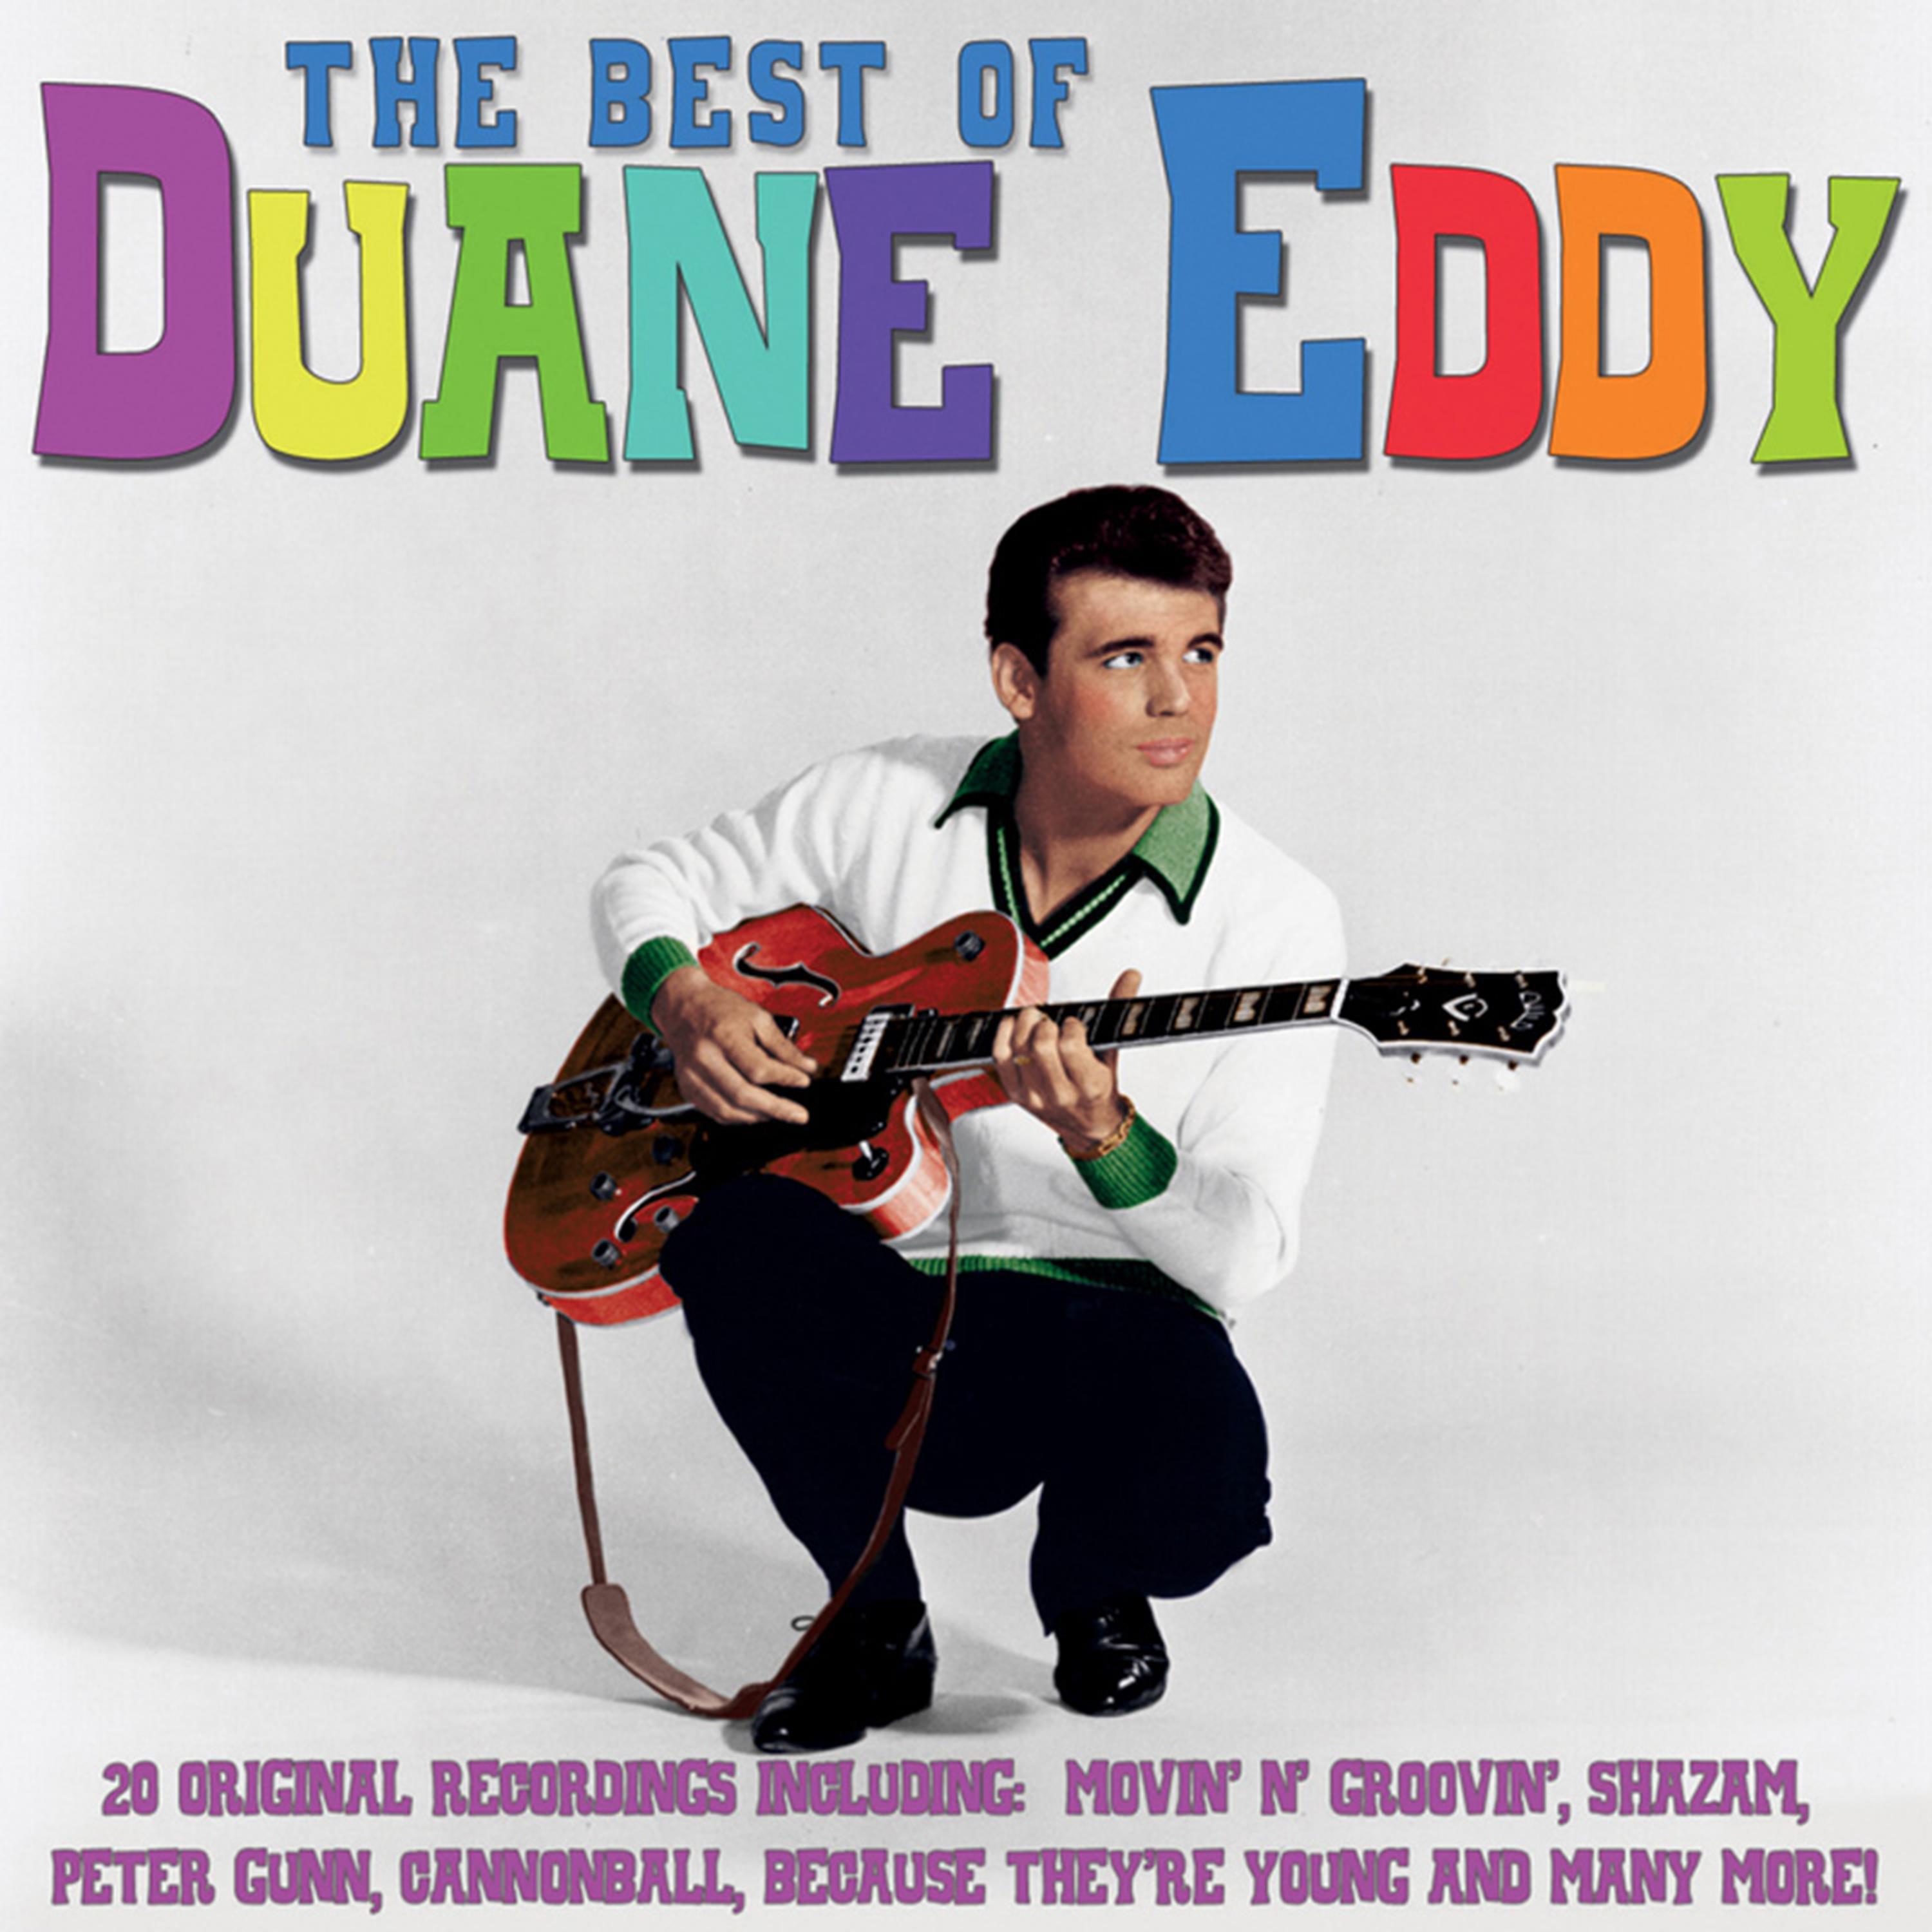 The Best of Duane Eddy